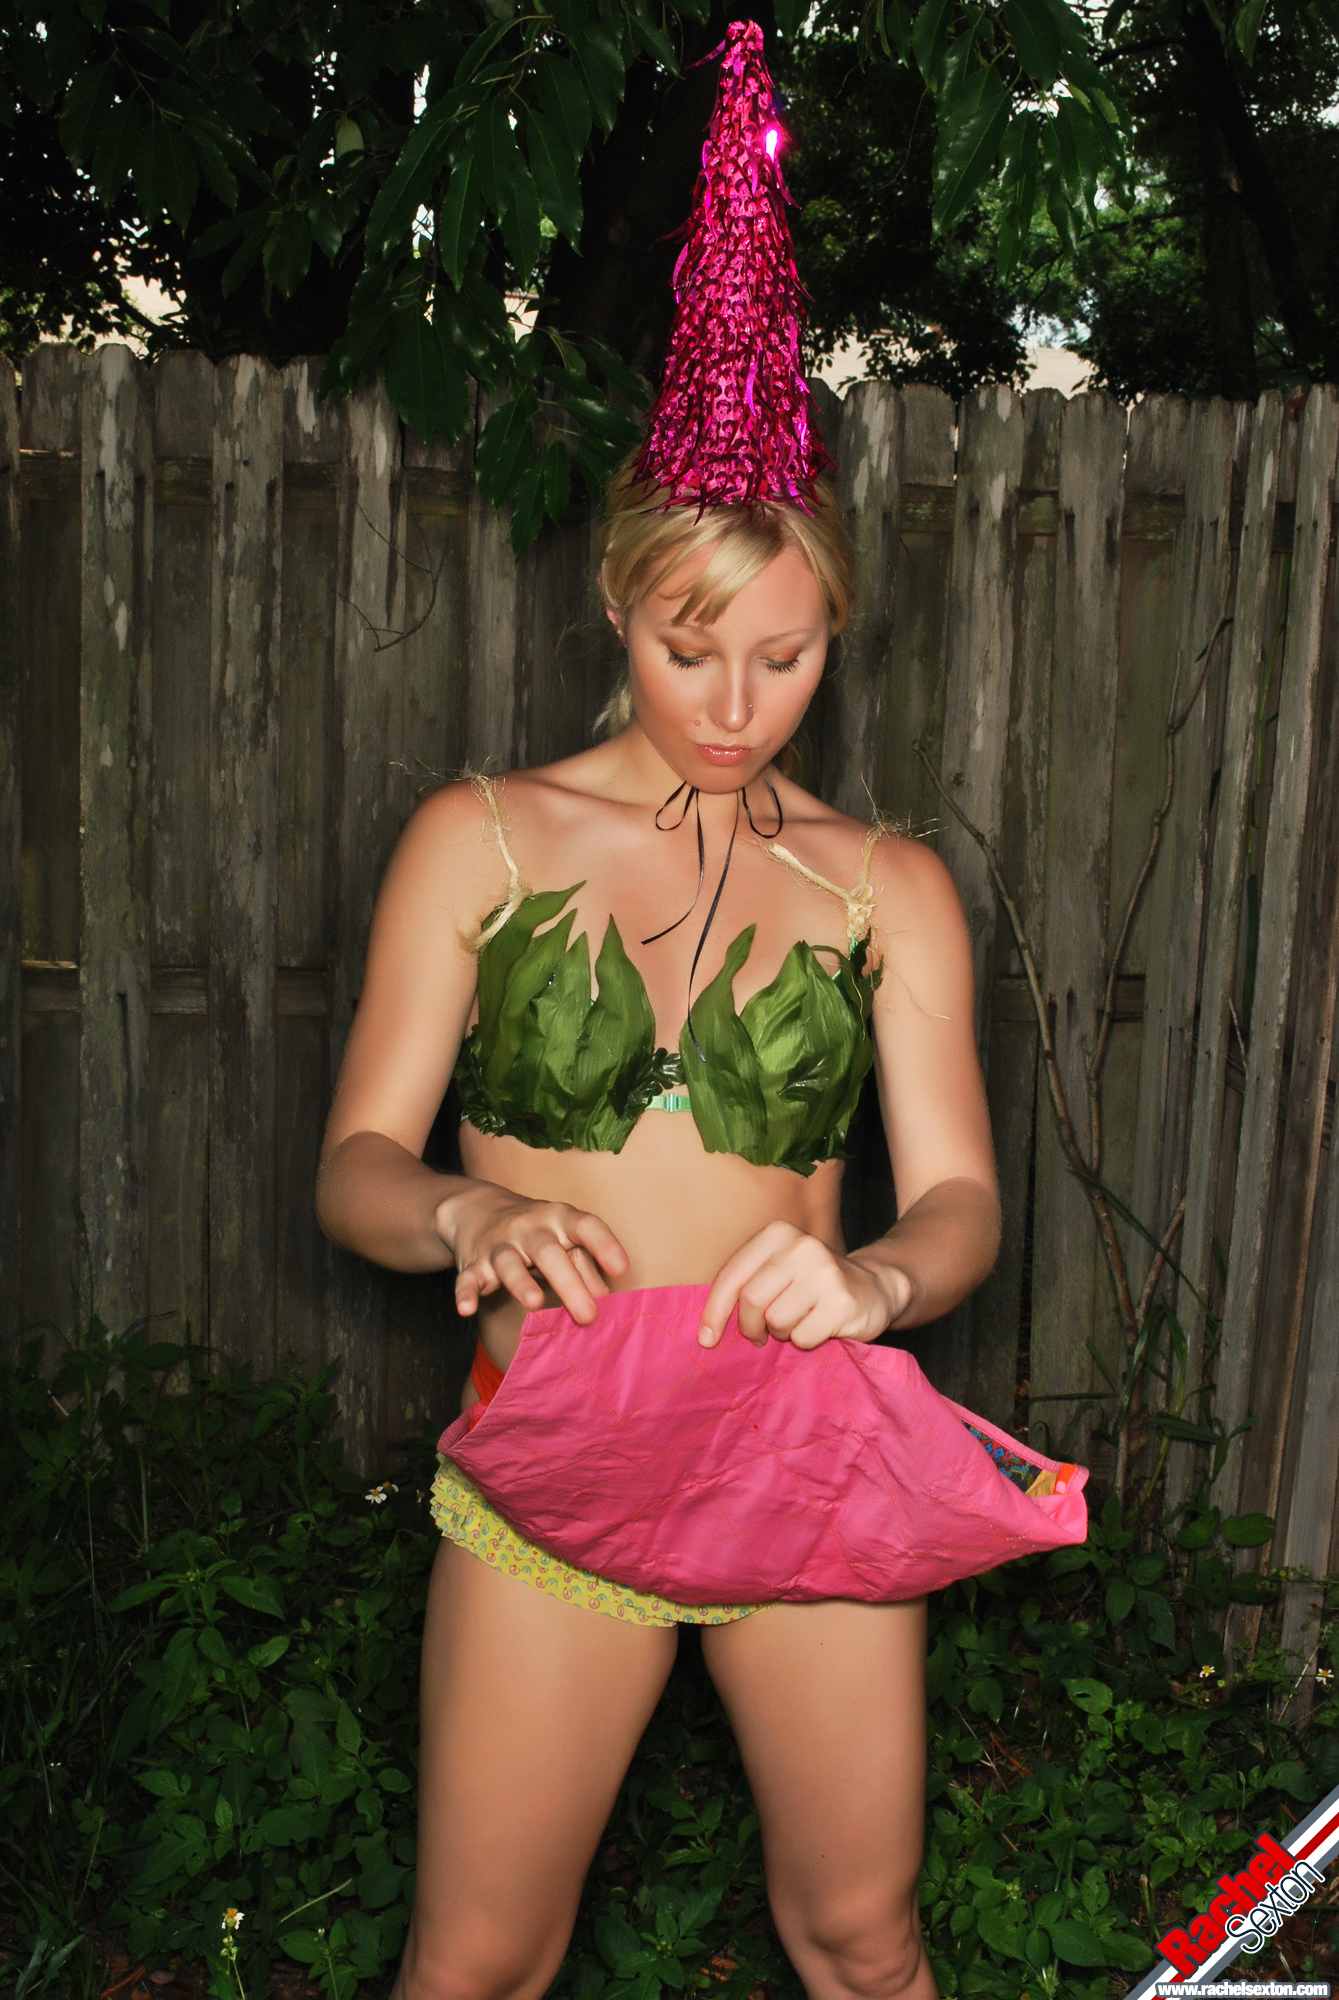 Rachel Sexton Is Gnome Alone Stripping In The Yard 206208